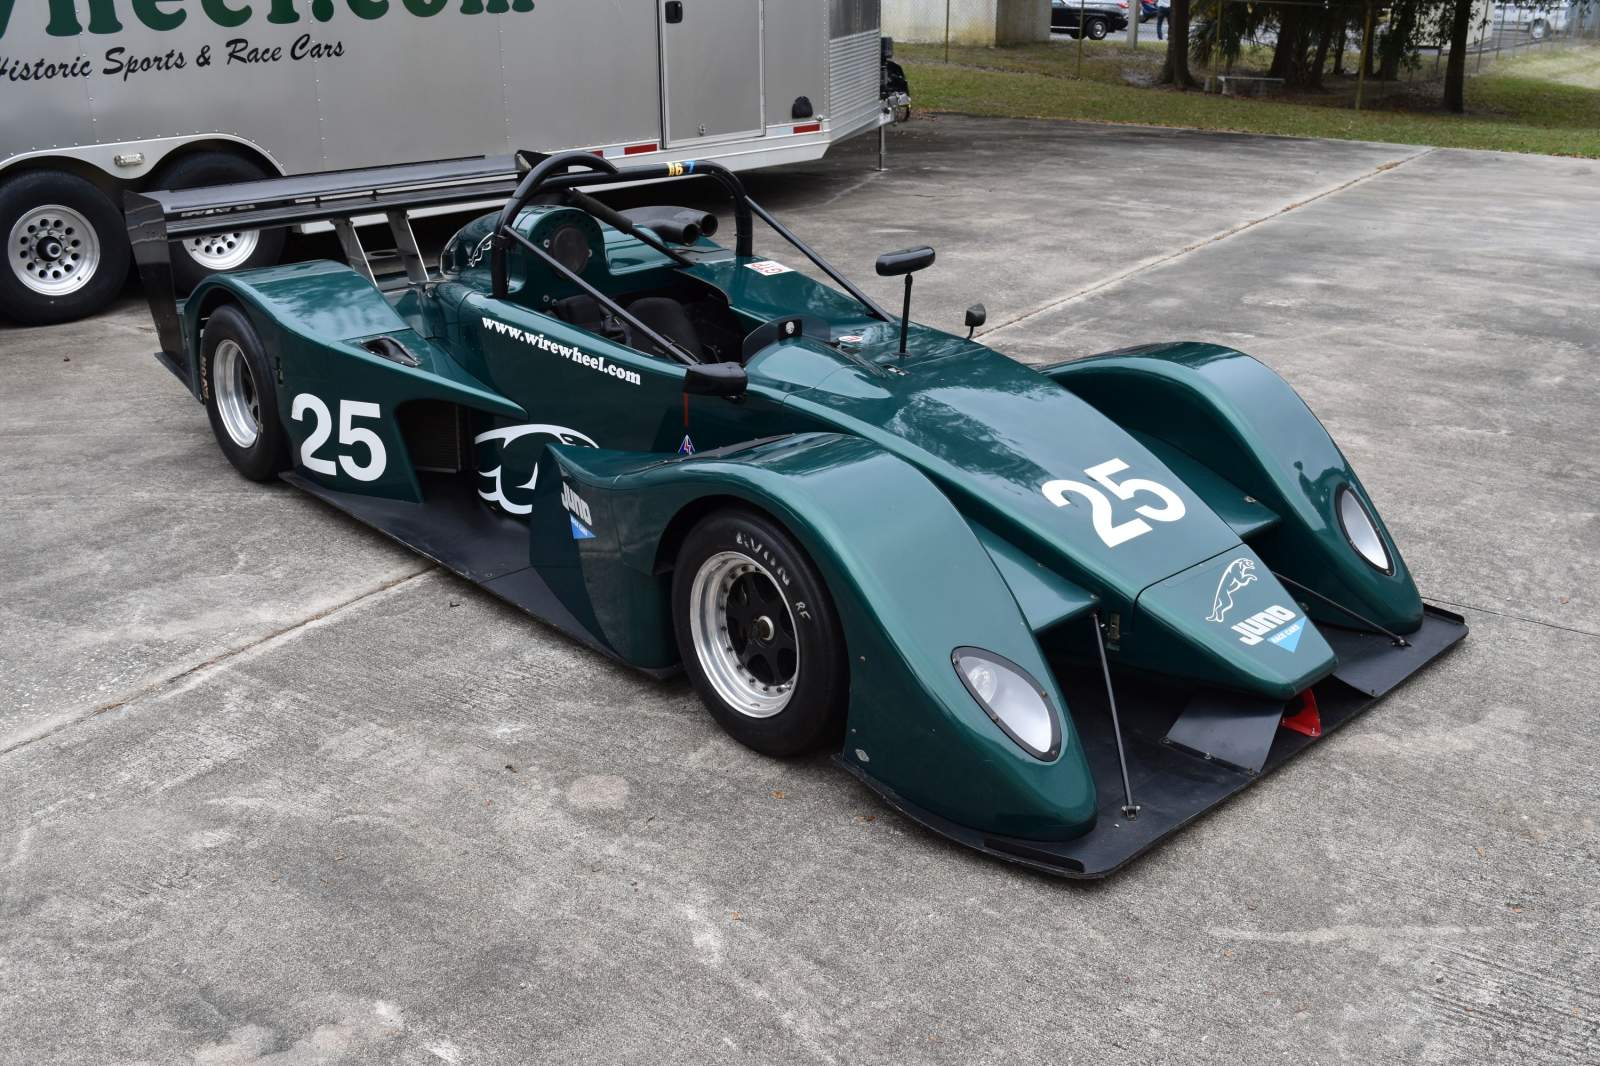 Juno SS3 Sports Racer for sale - Race Car Ads